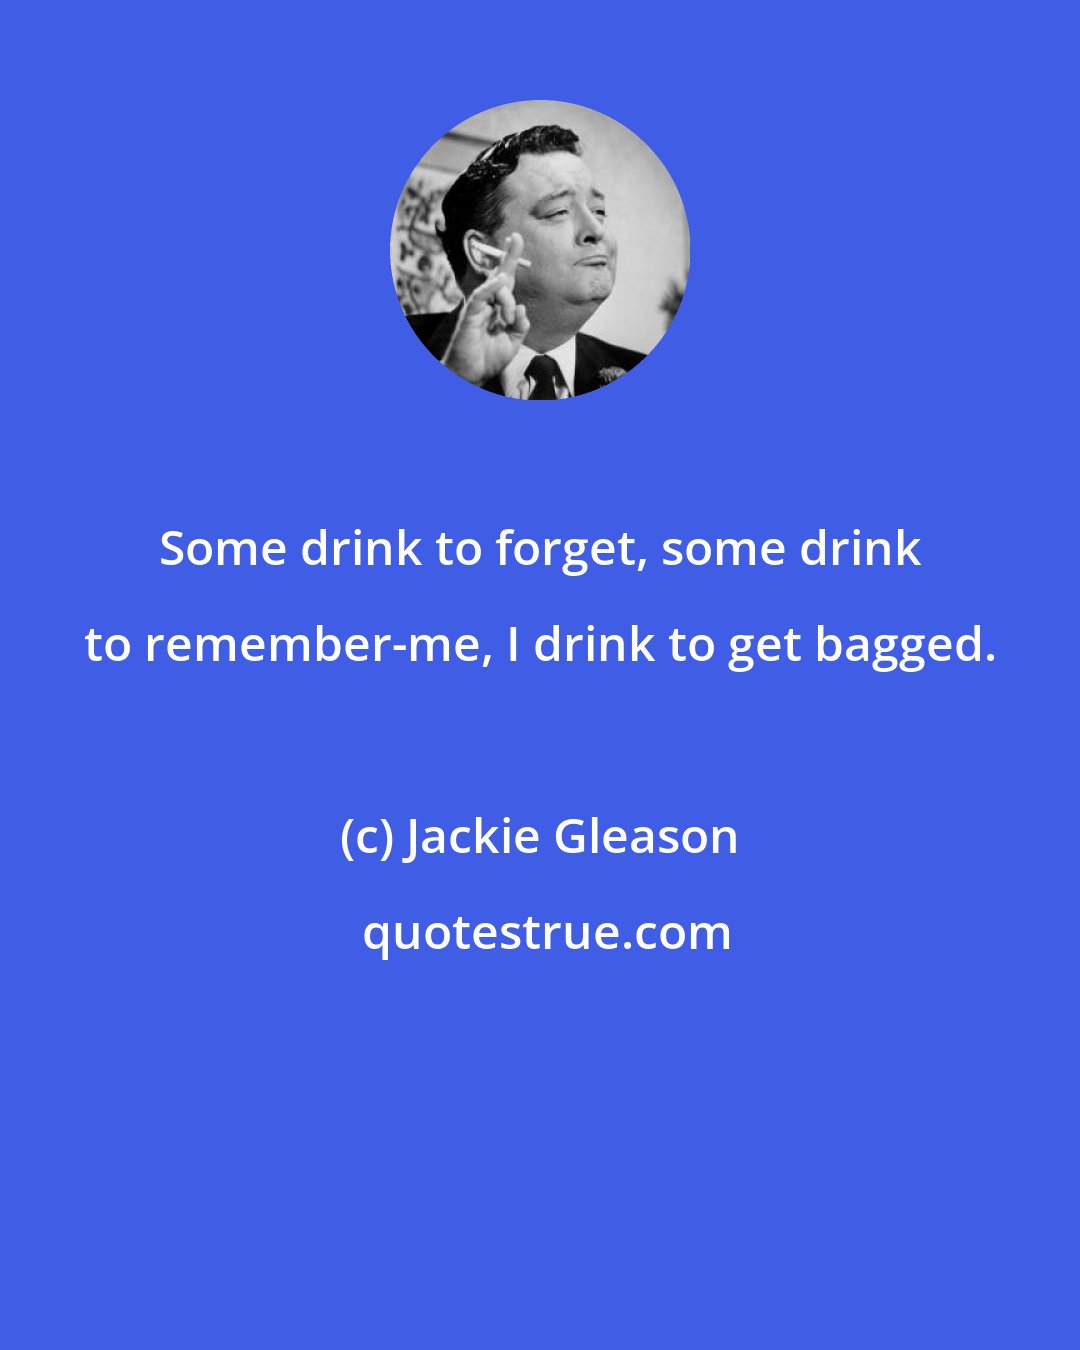 Jackie Gleason: Some drink to forget, some drink to remember-me, I drink to get bagged.